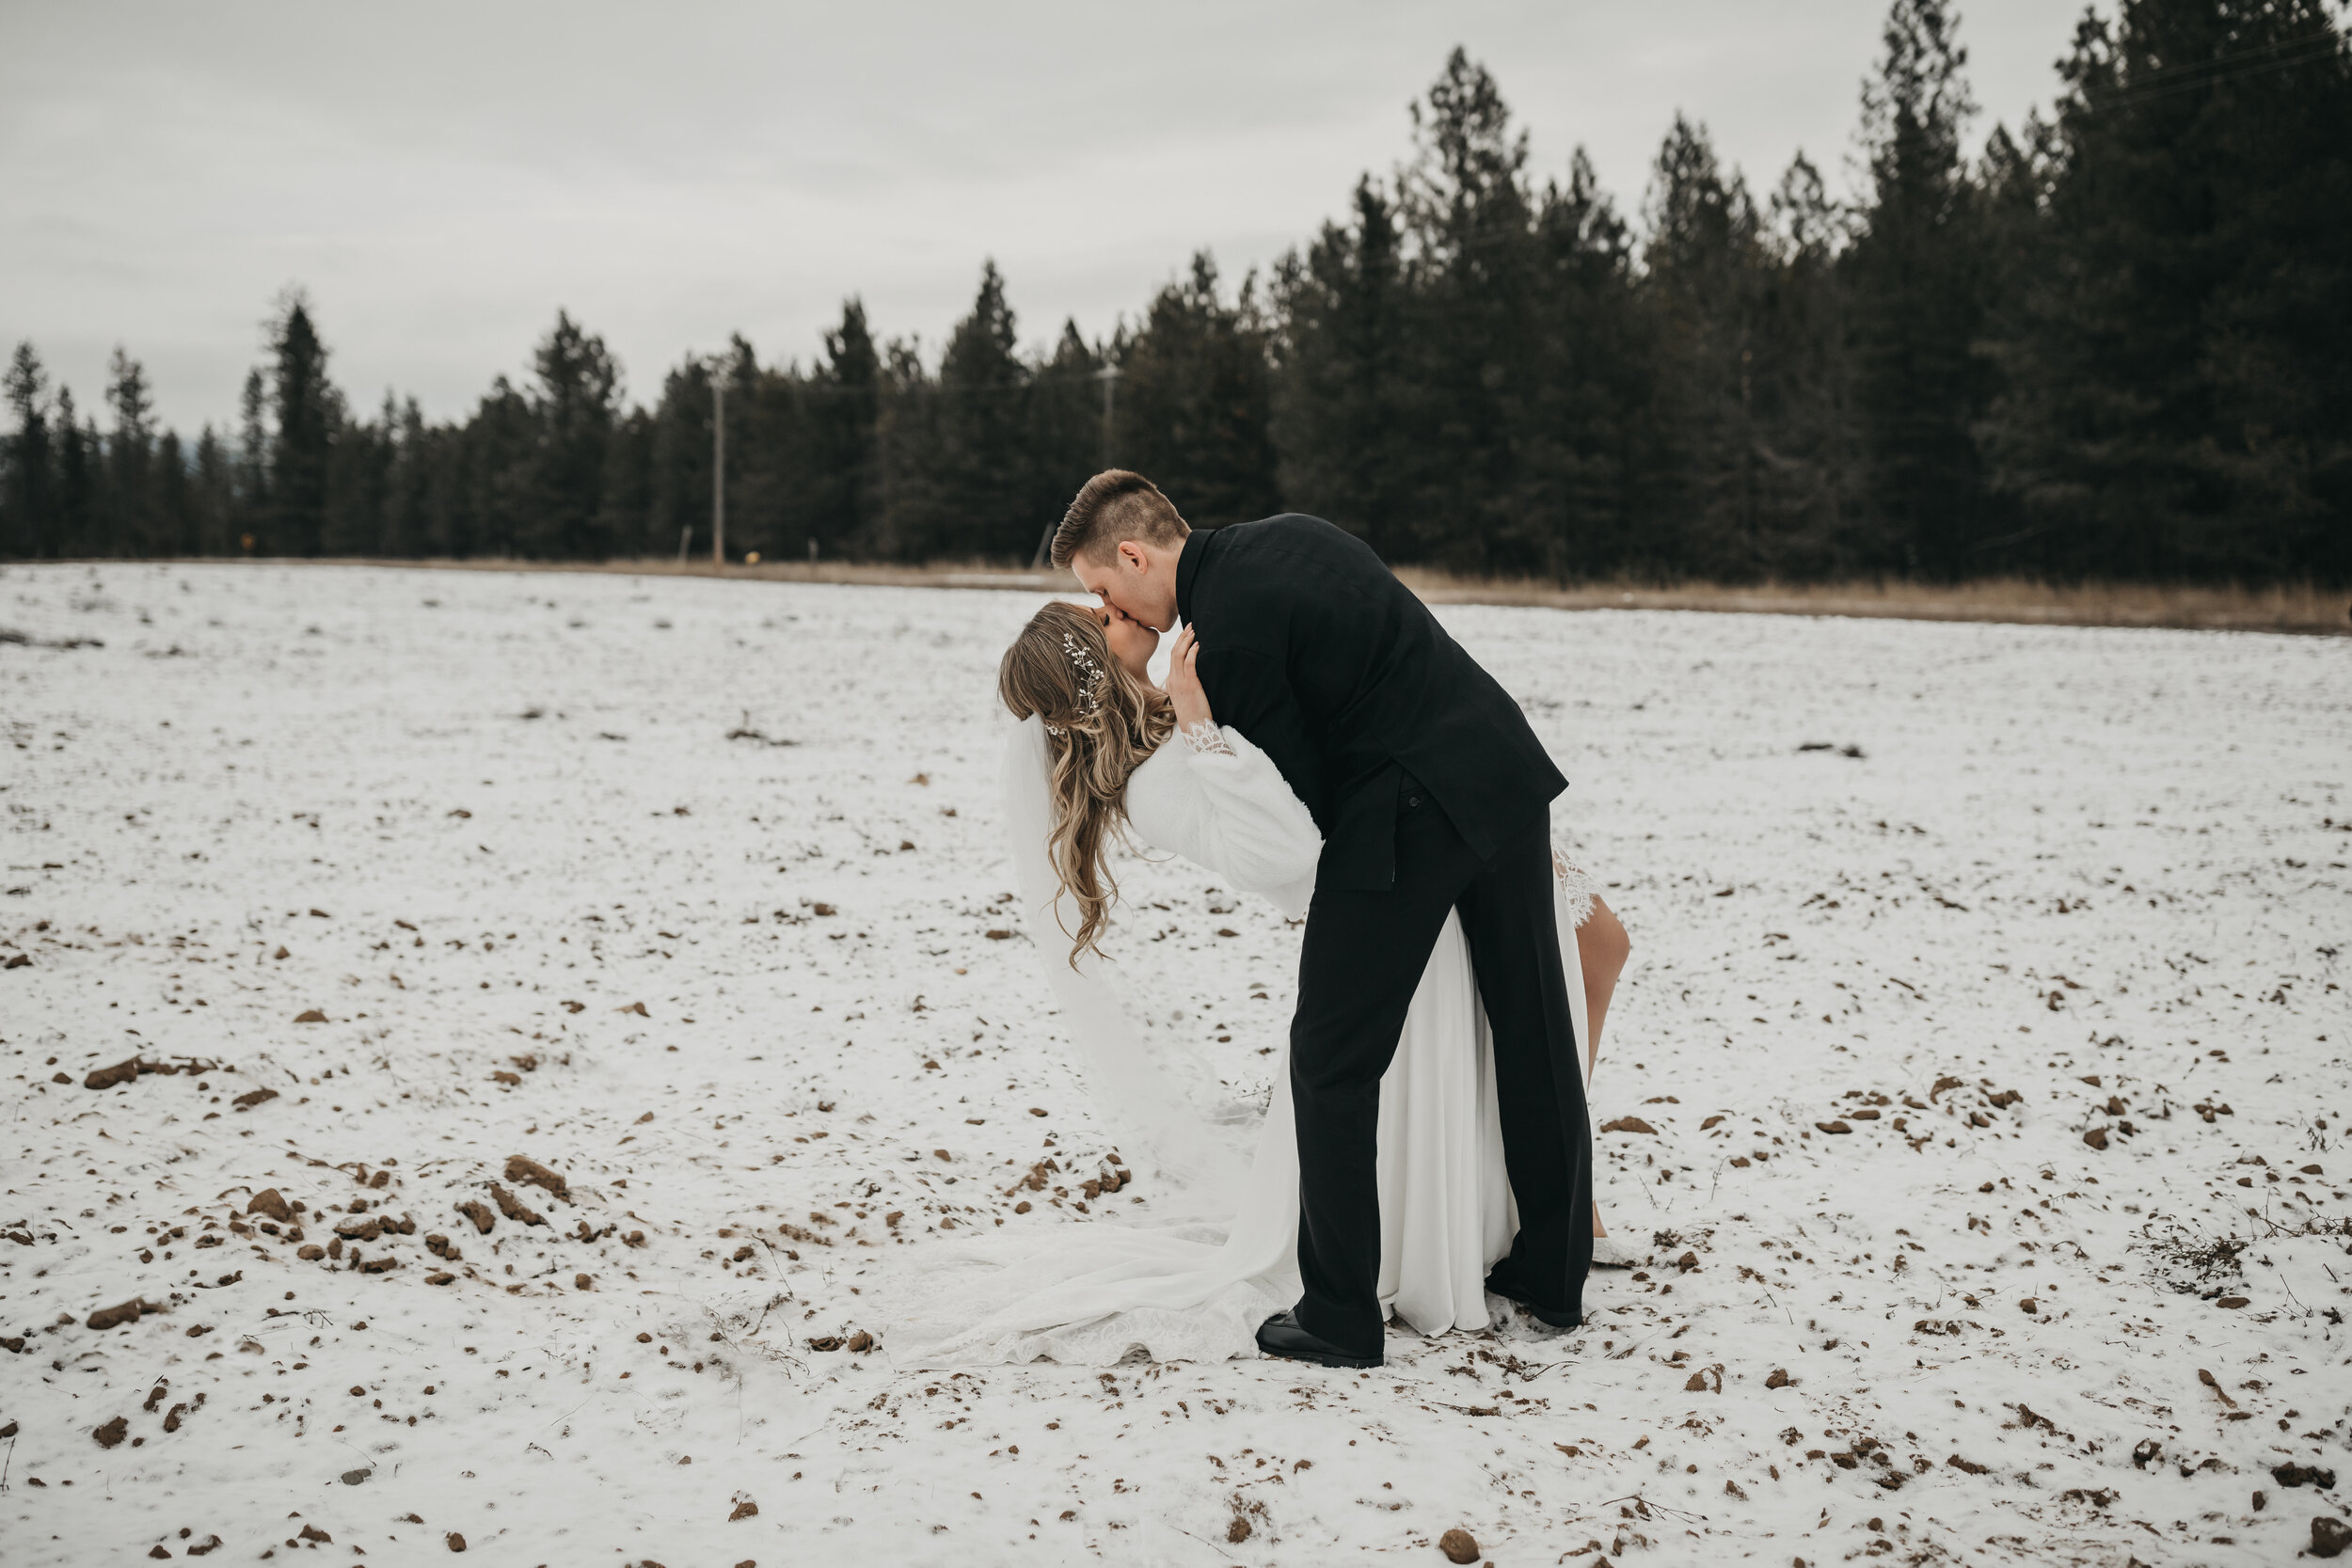 6 Reasons to Save That Winter Wedding Date!